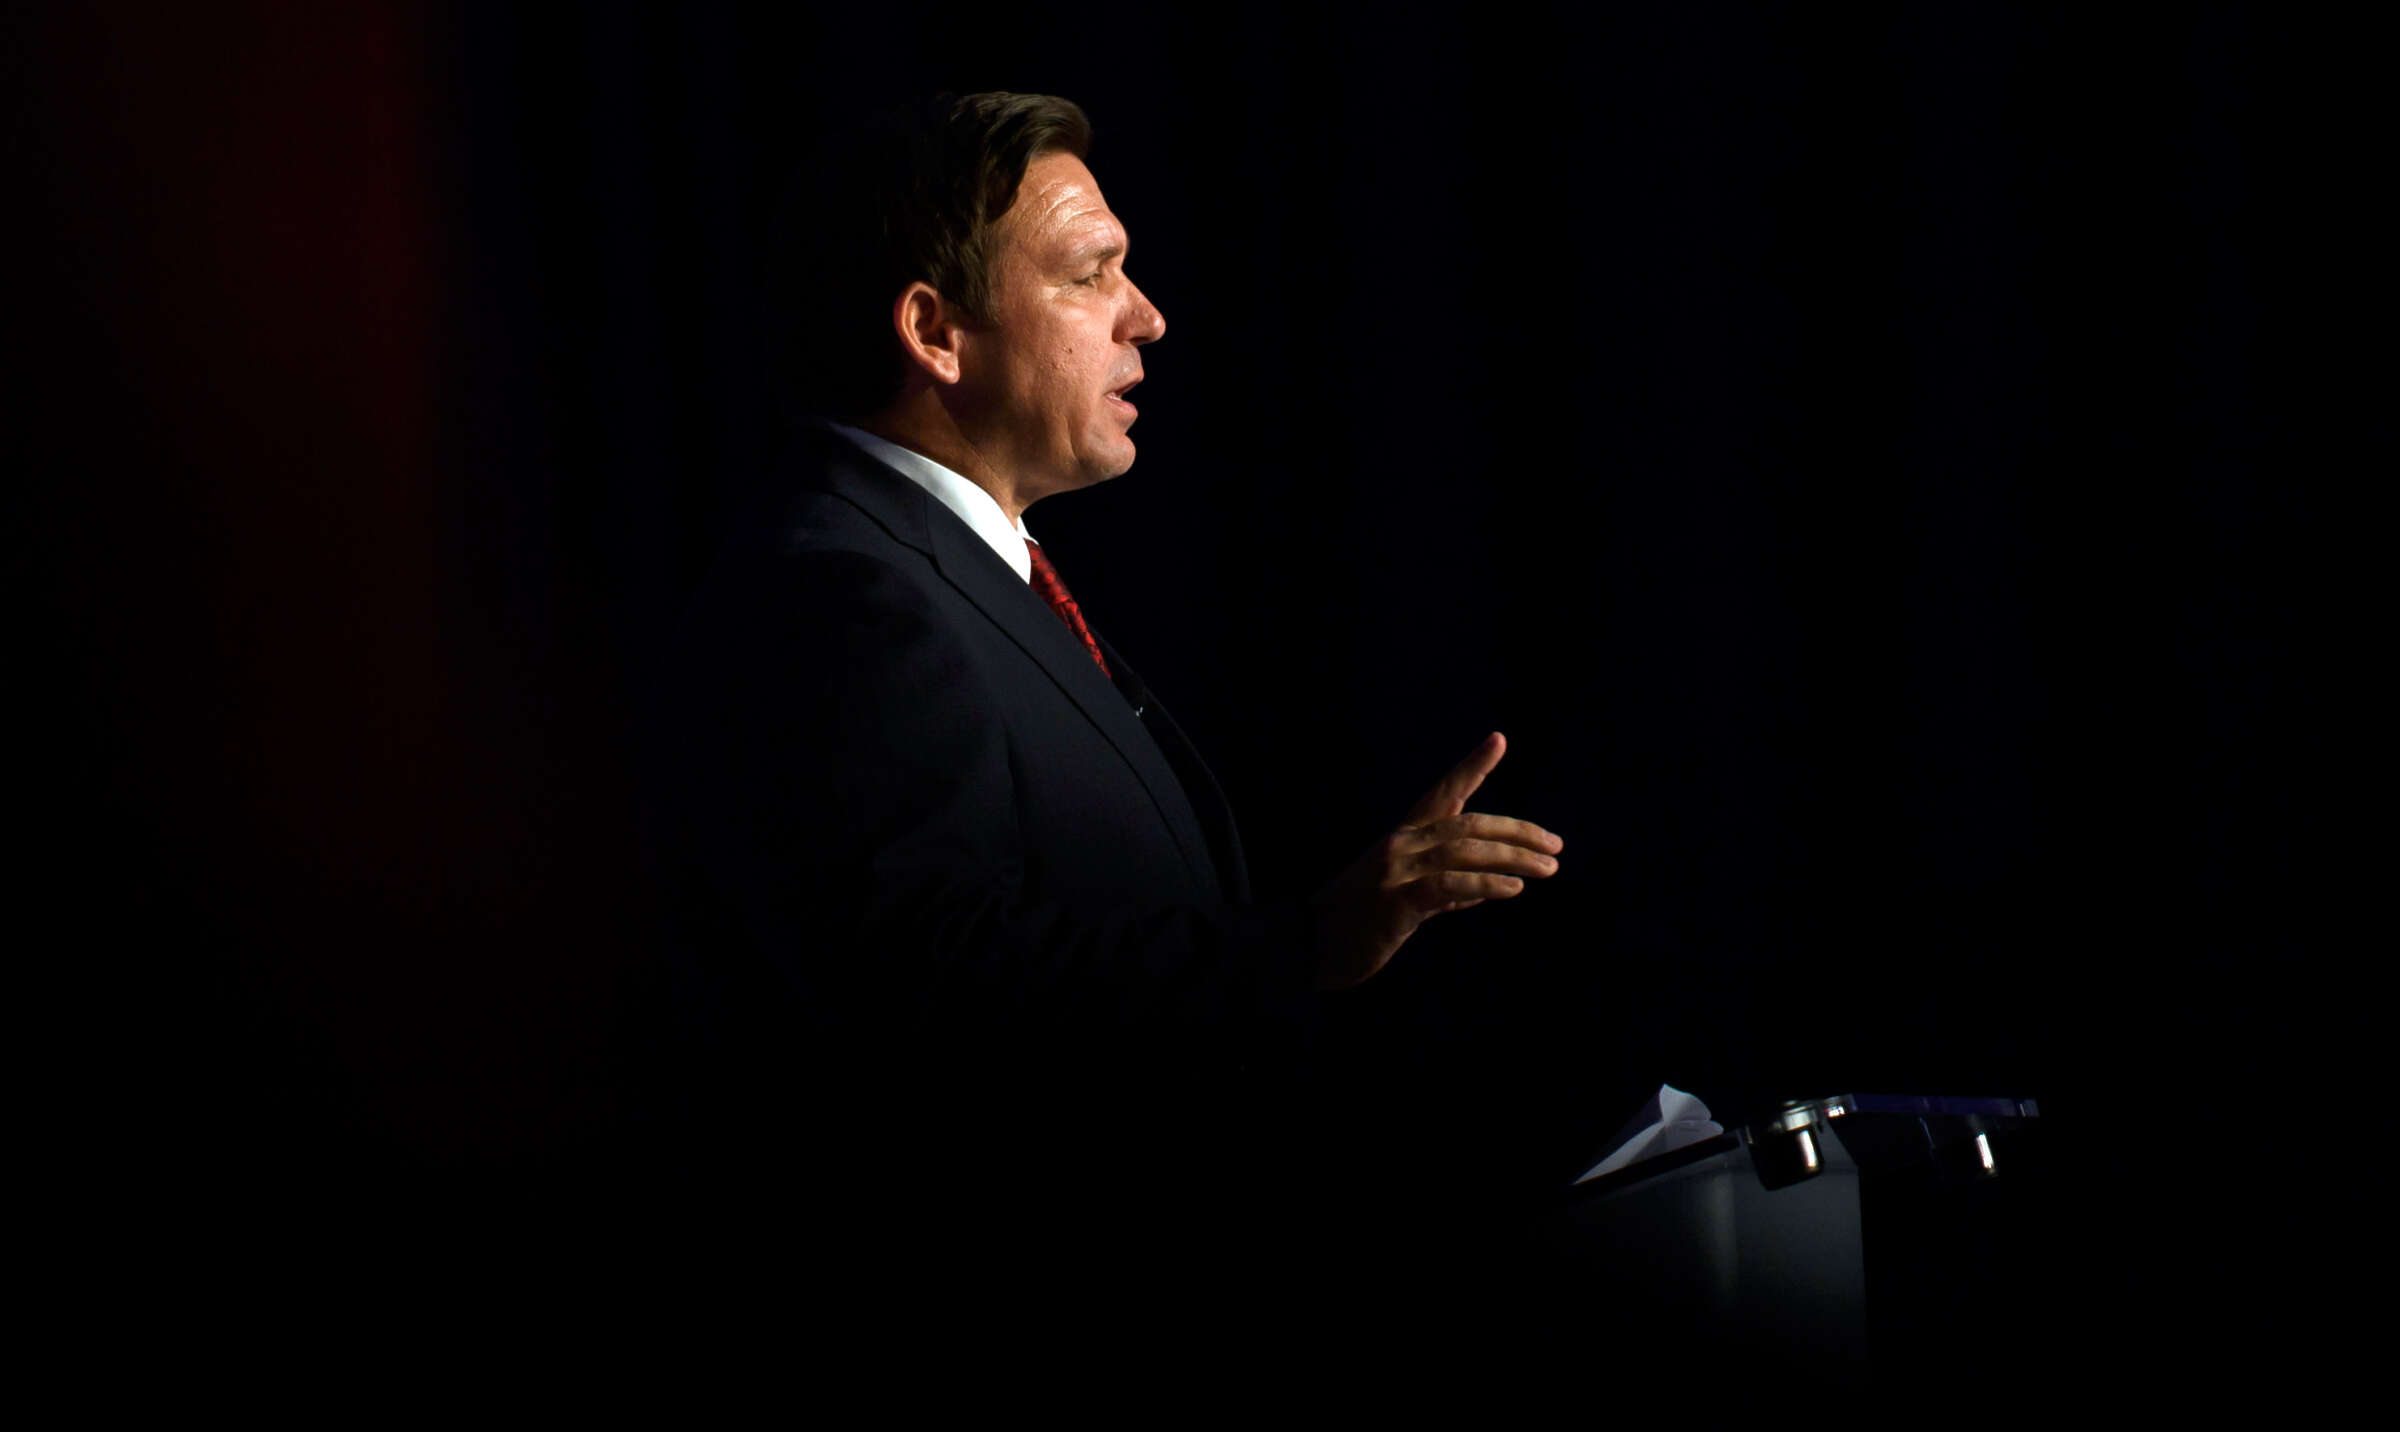 Case Study in the threat of Fascism to America: Florida Gov. Ron DeSantis has pursued white supremacist policies with deep roots in the Jim Crow era (truthout.org)